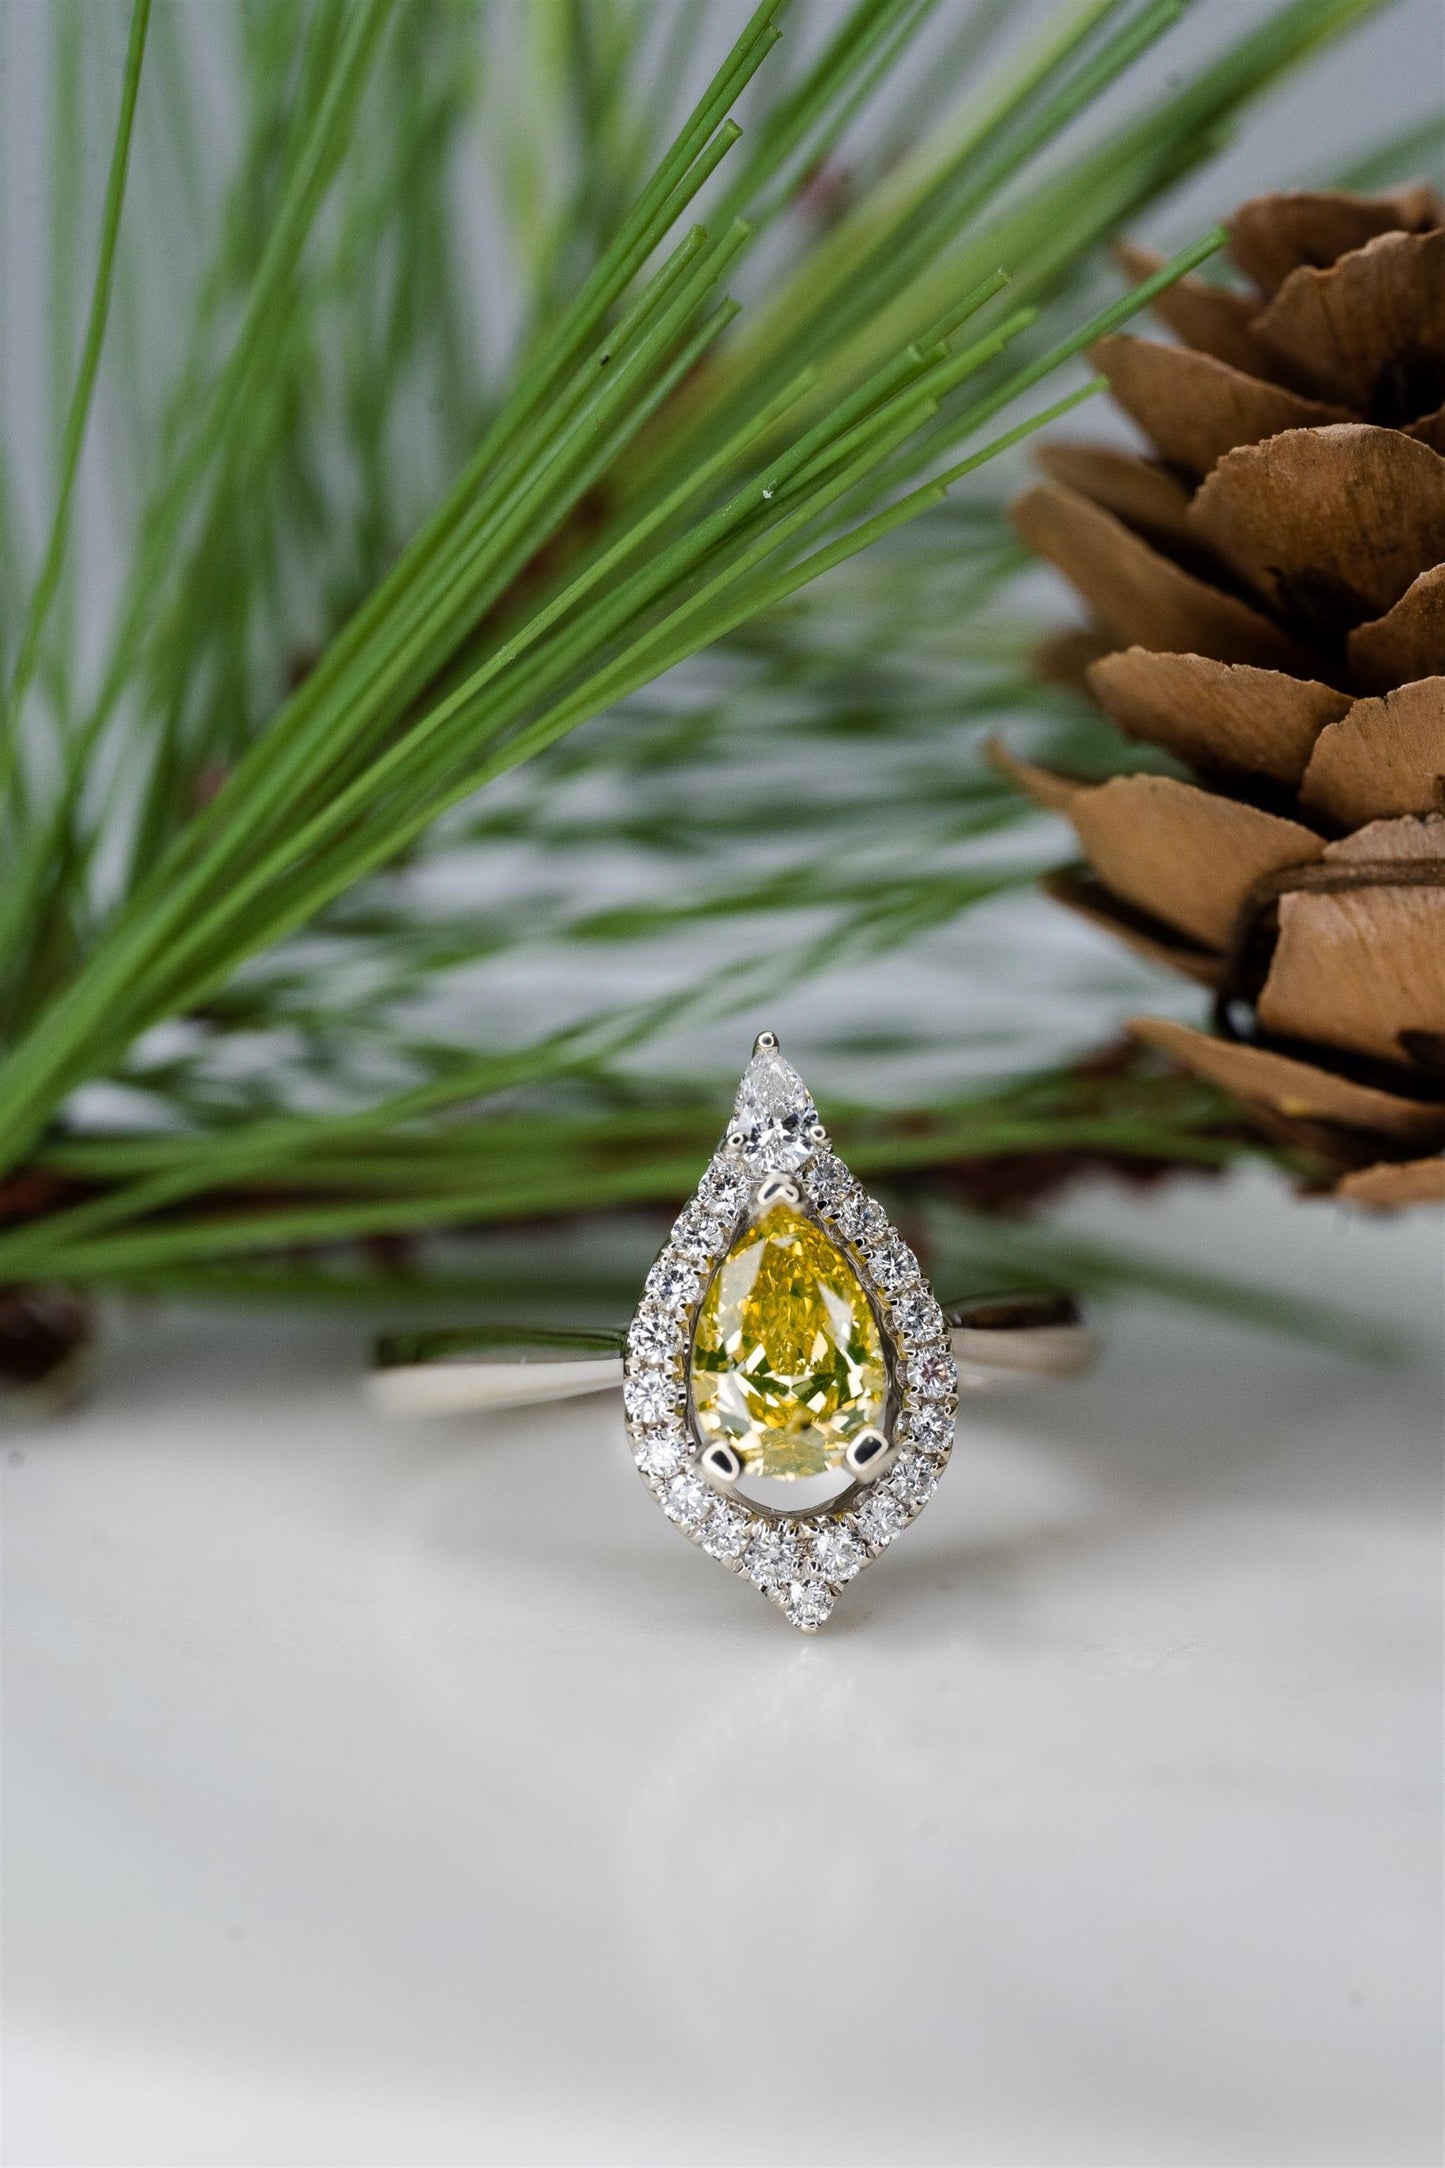 14K White Gold Intense Yellow Pear Diamond and Halo Ring